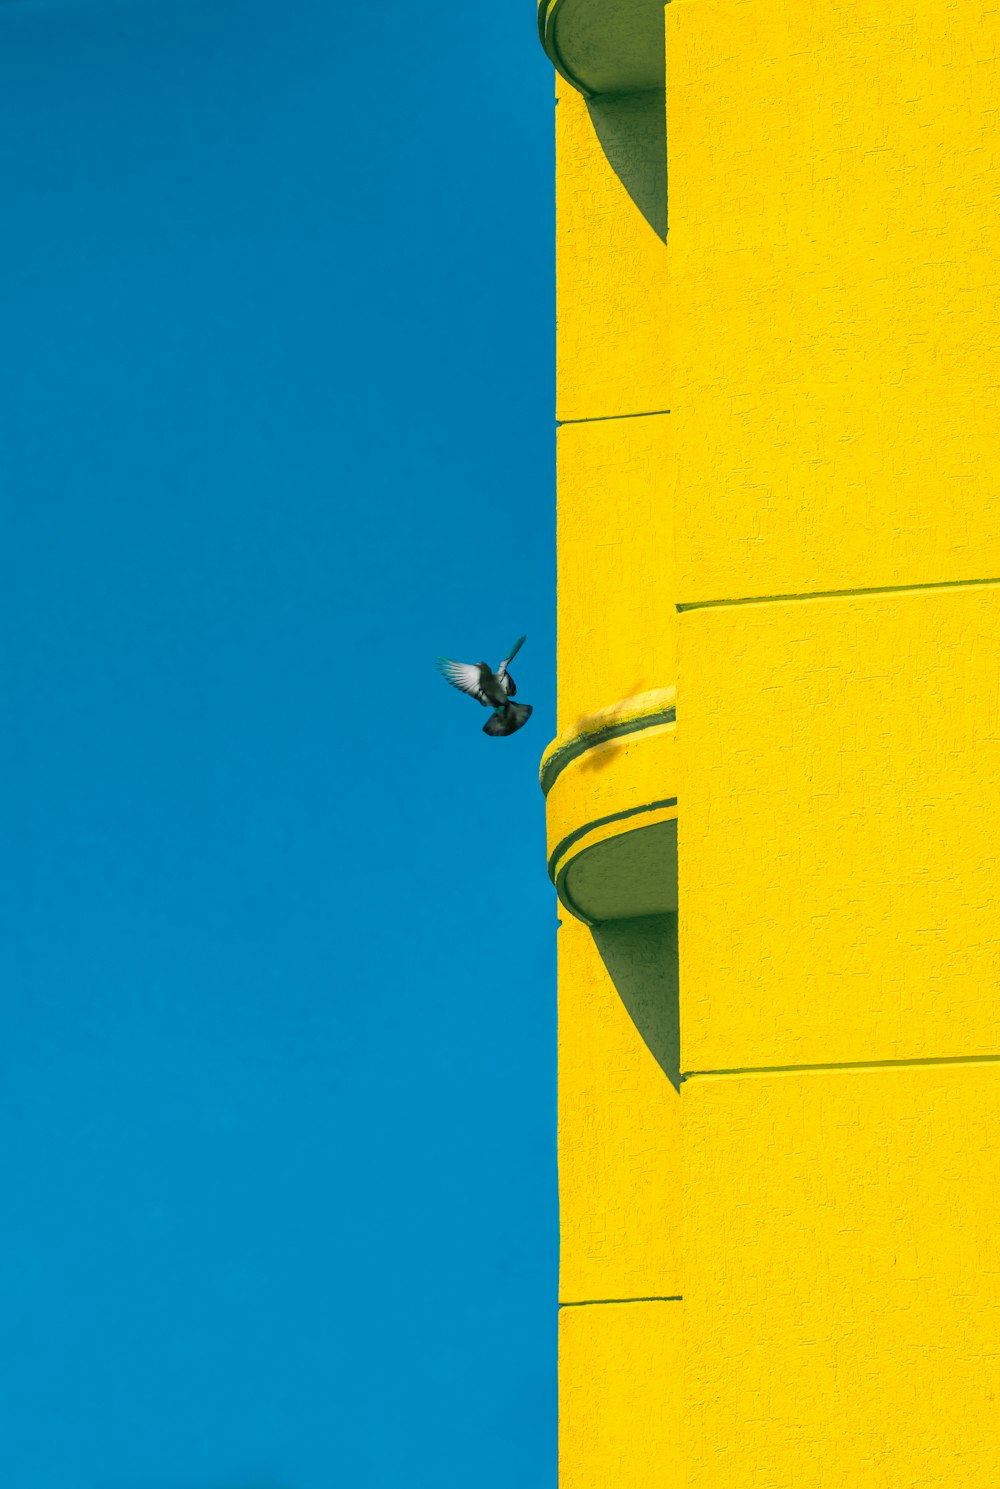 a bee flying past a yellow building with a blue sky in the background